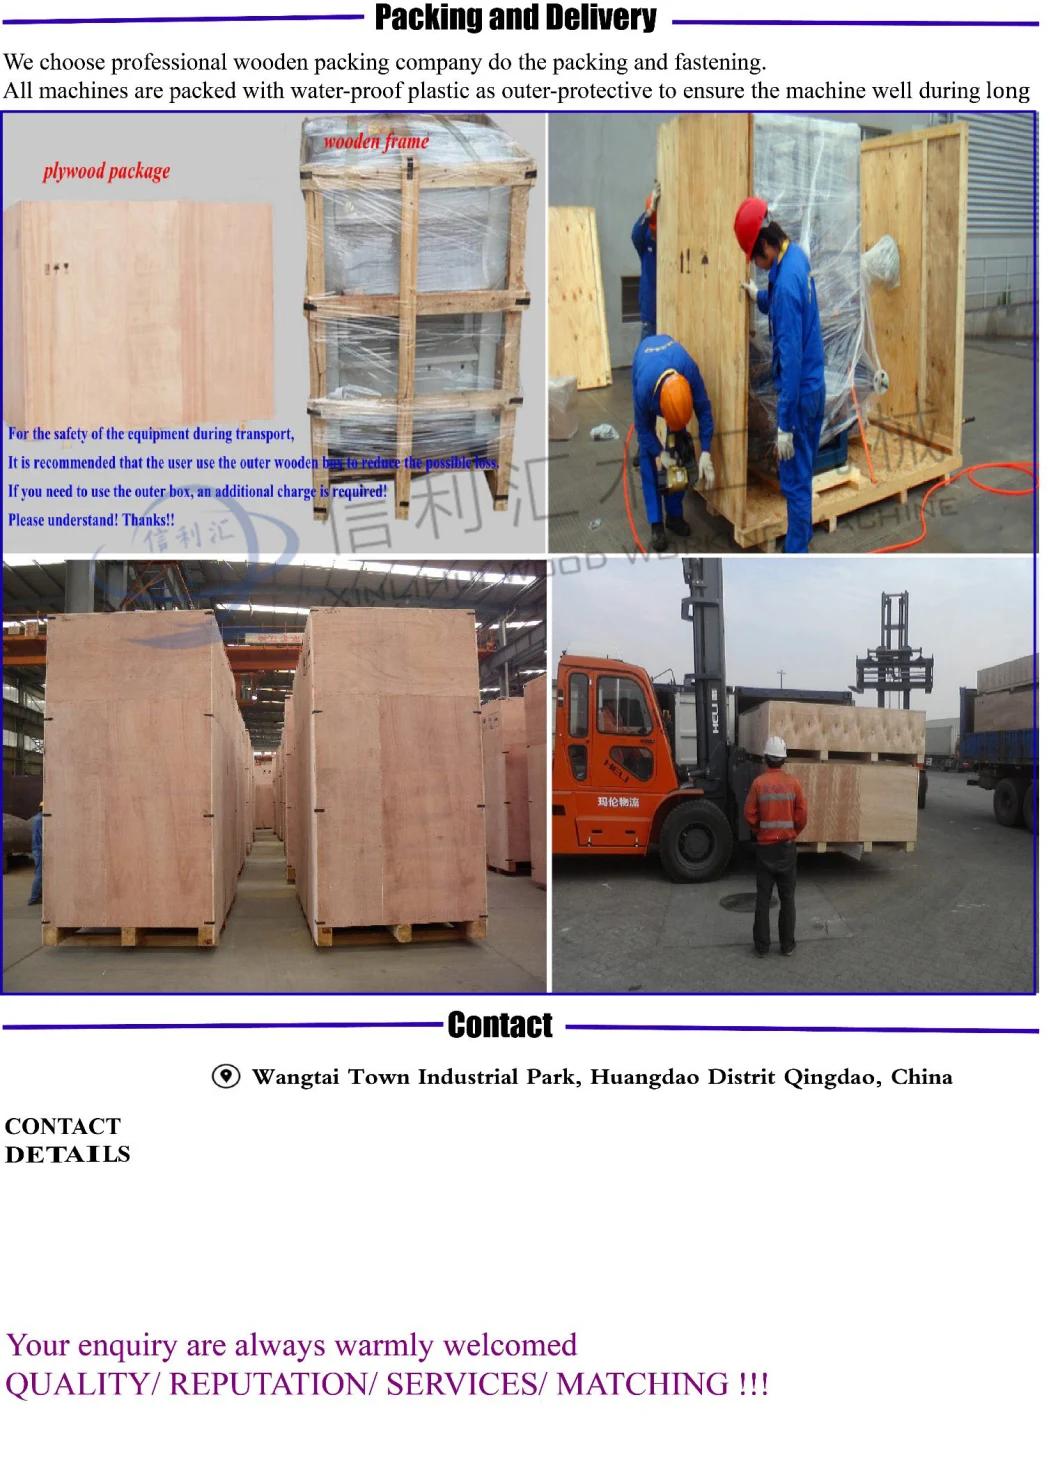 Wood Based Panel Machinery Table Saw for Woodworking Circular Saw Machine Wood with Overhead Guard for Circular Saws Circular Saws Overhead